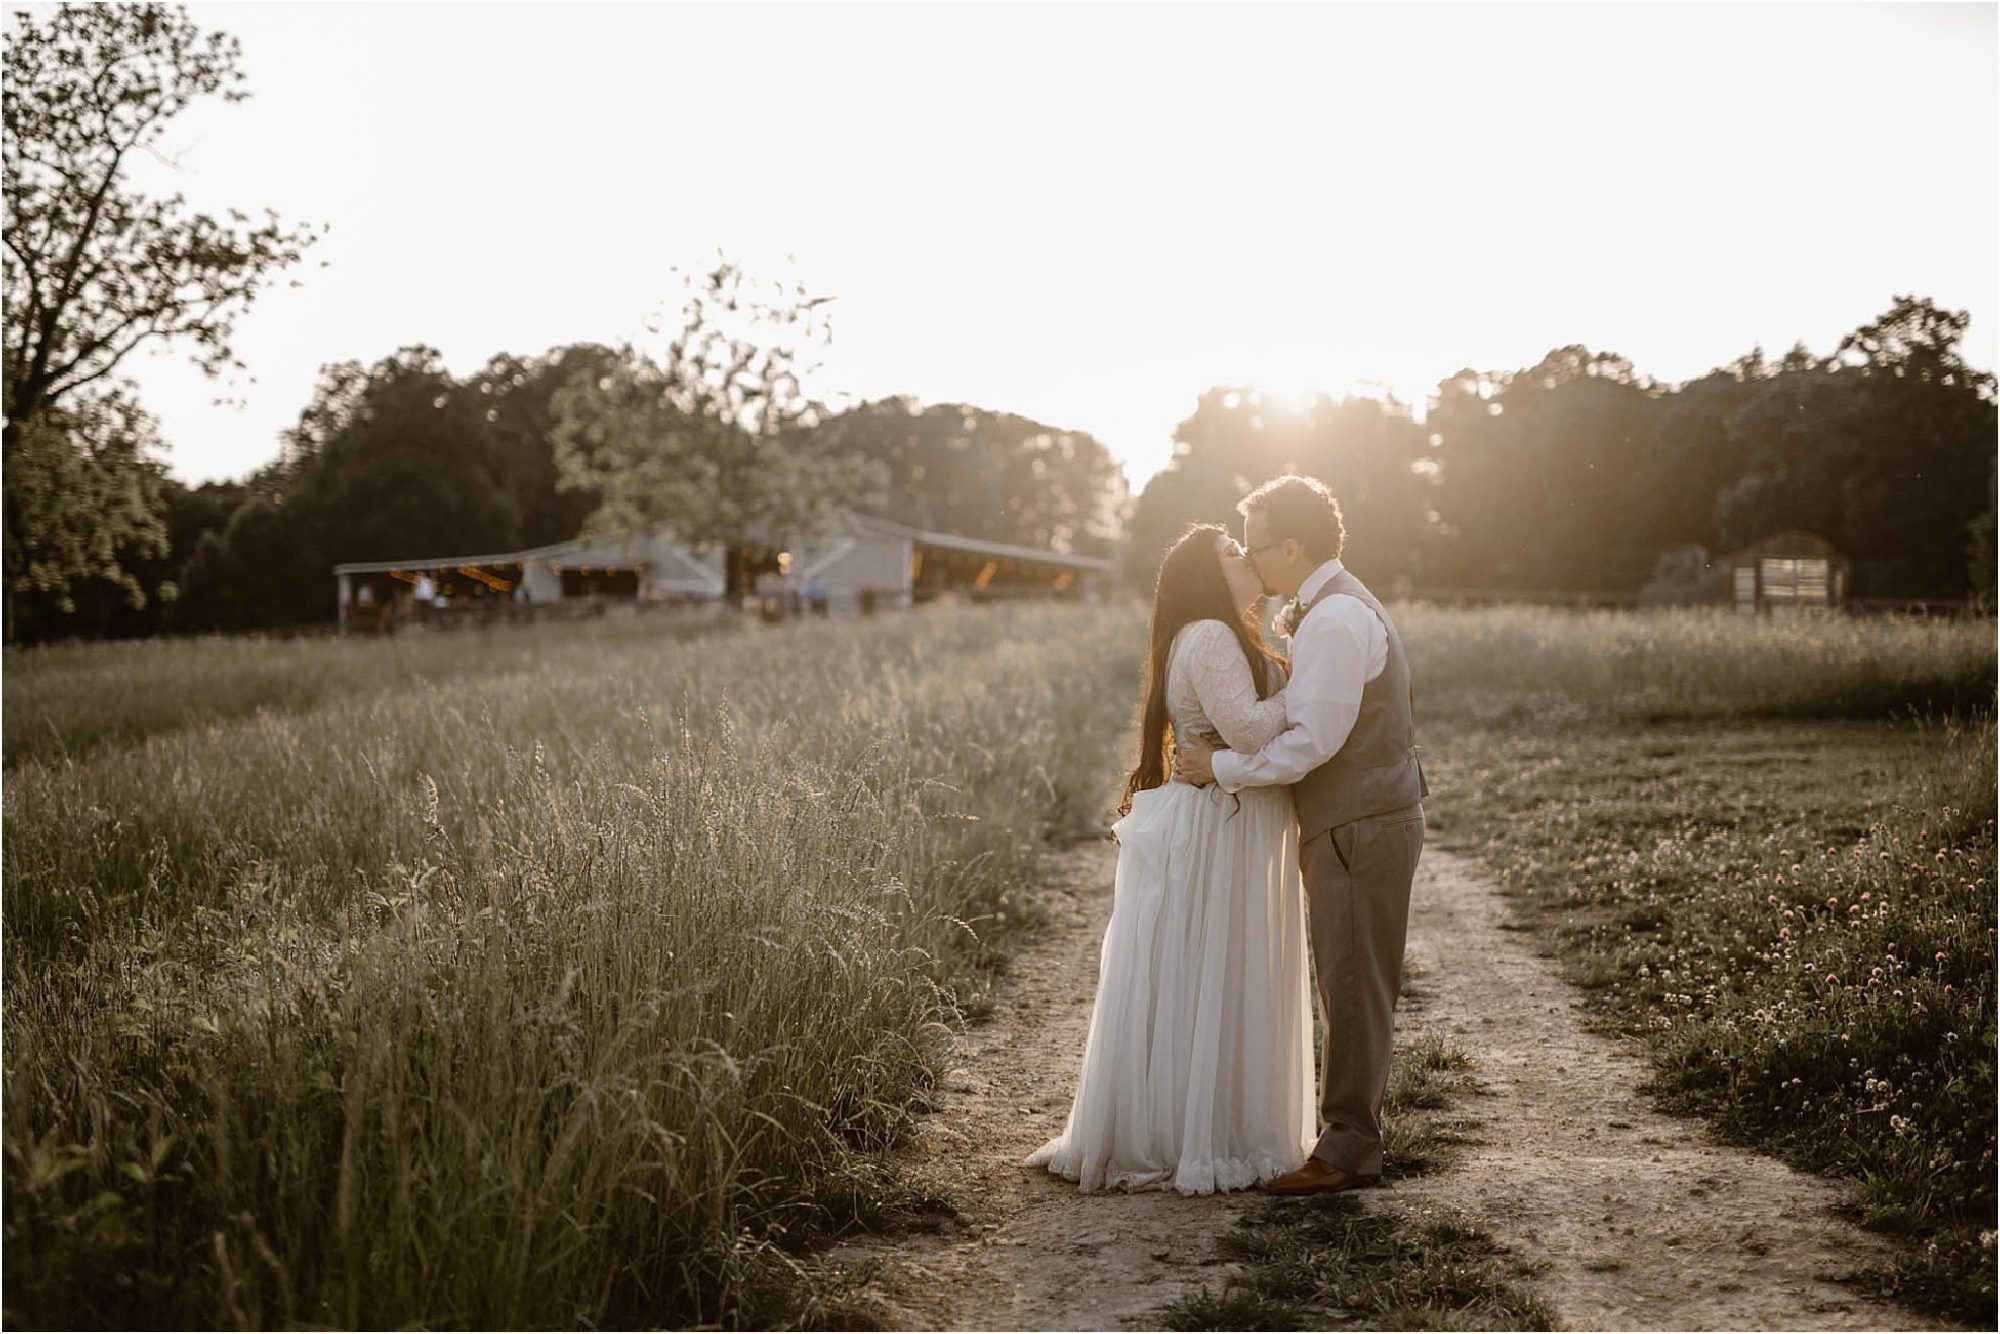 bride and groom kissing in field at sunset